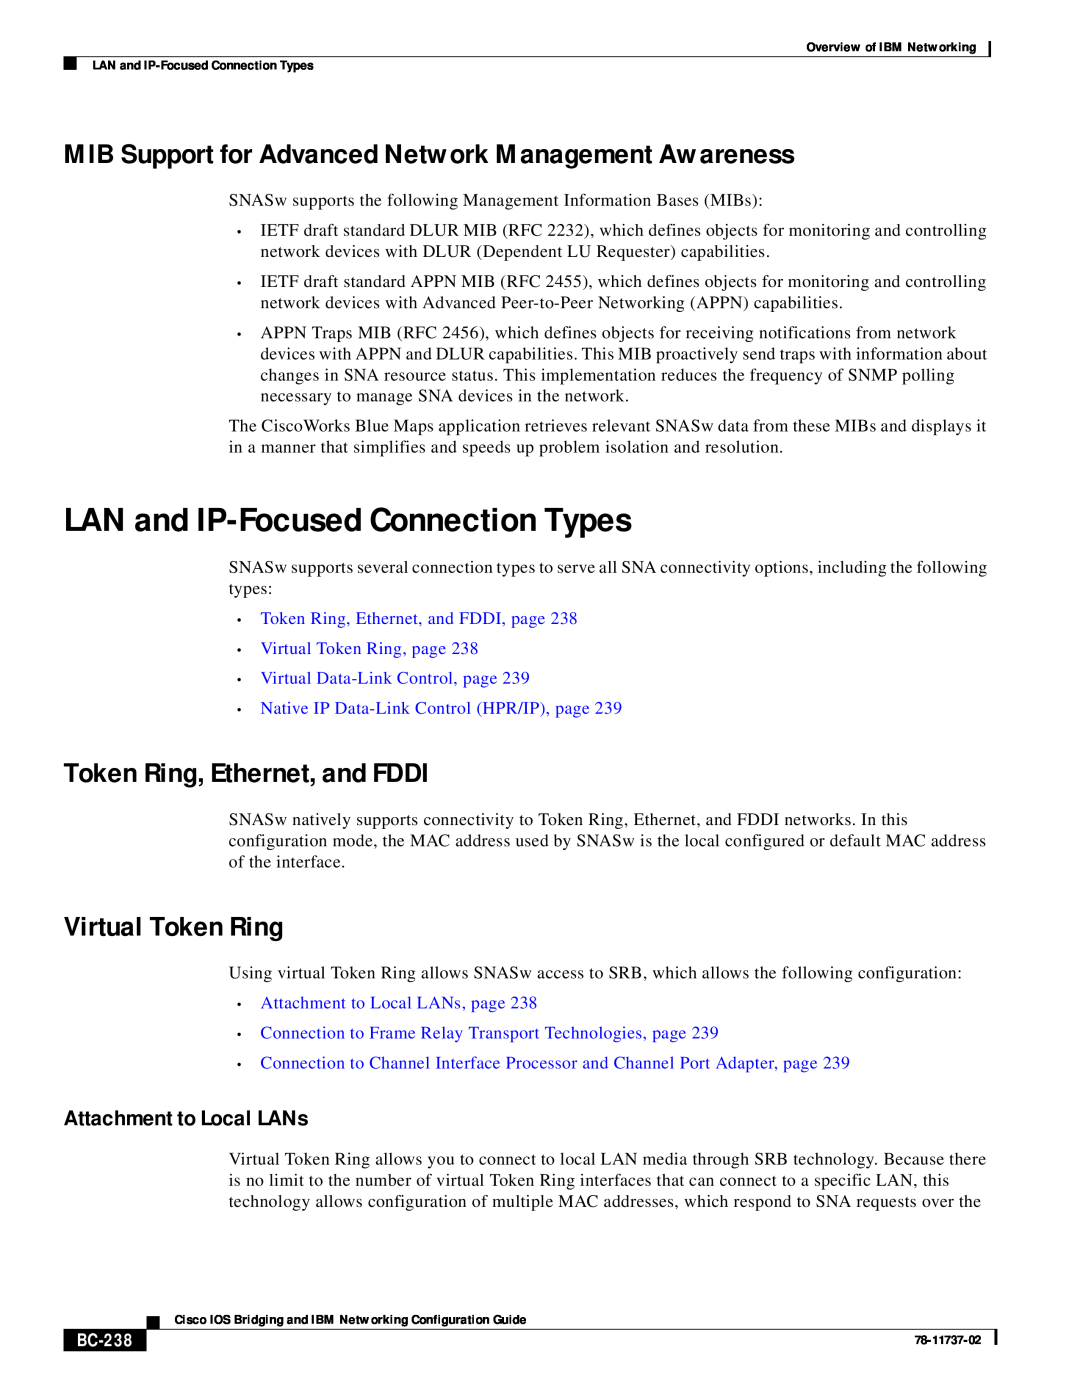 IBM BC-201 LAN and IP-Focused Connection Types, MIB Support for Advanced Network Management Awareness, Virtual Token Ring 